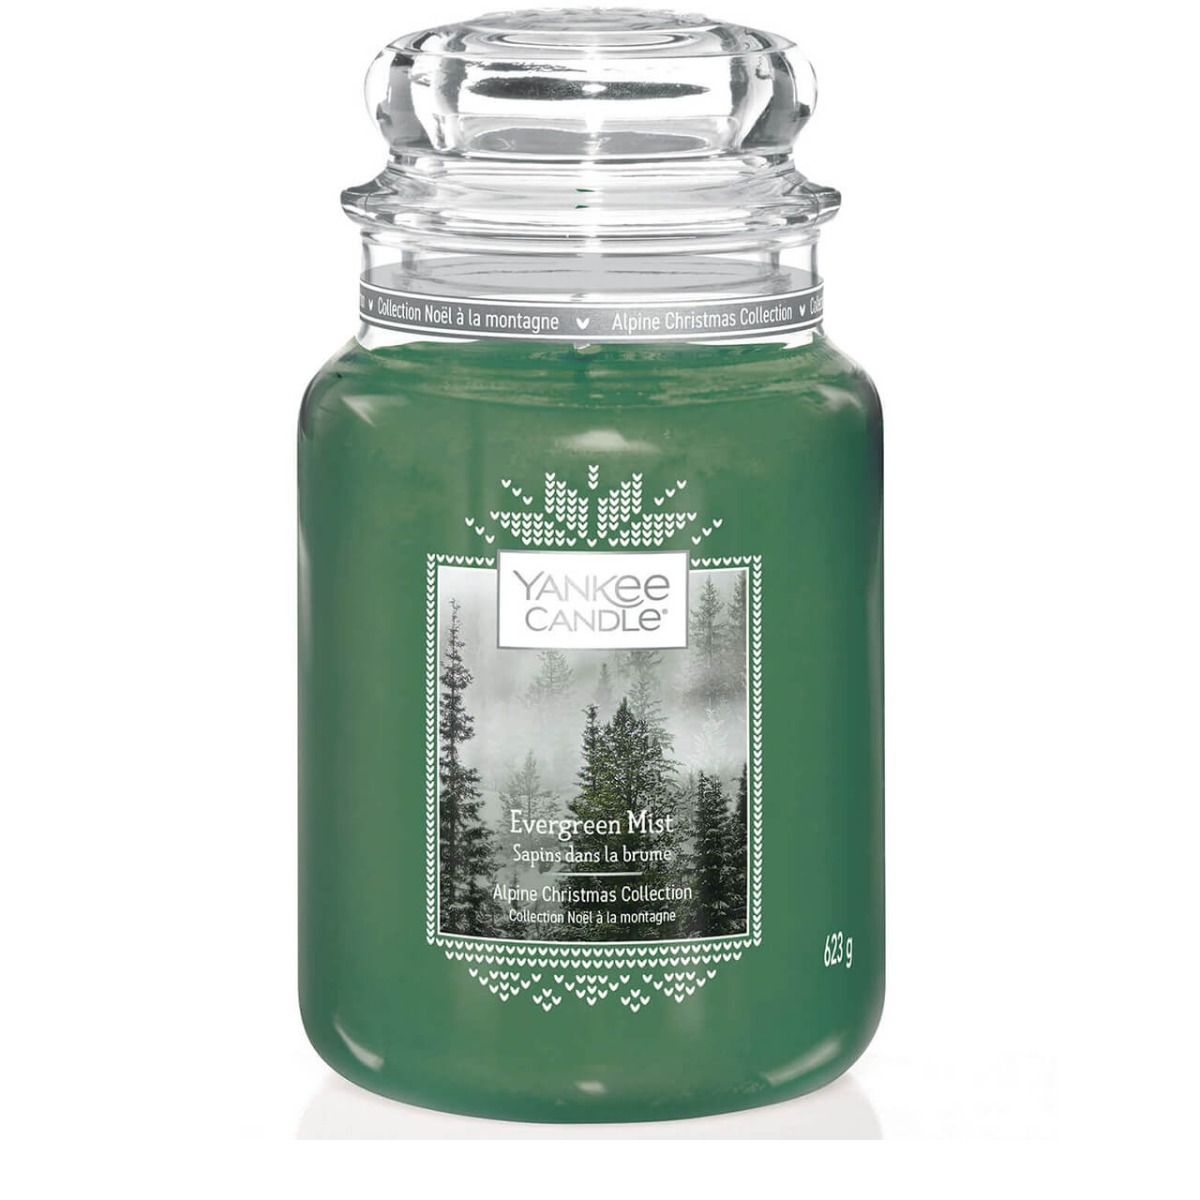 Yankee Candle Classic Large Evergreen Mist 623g